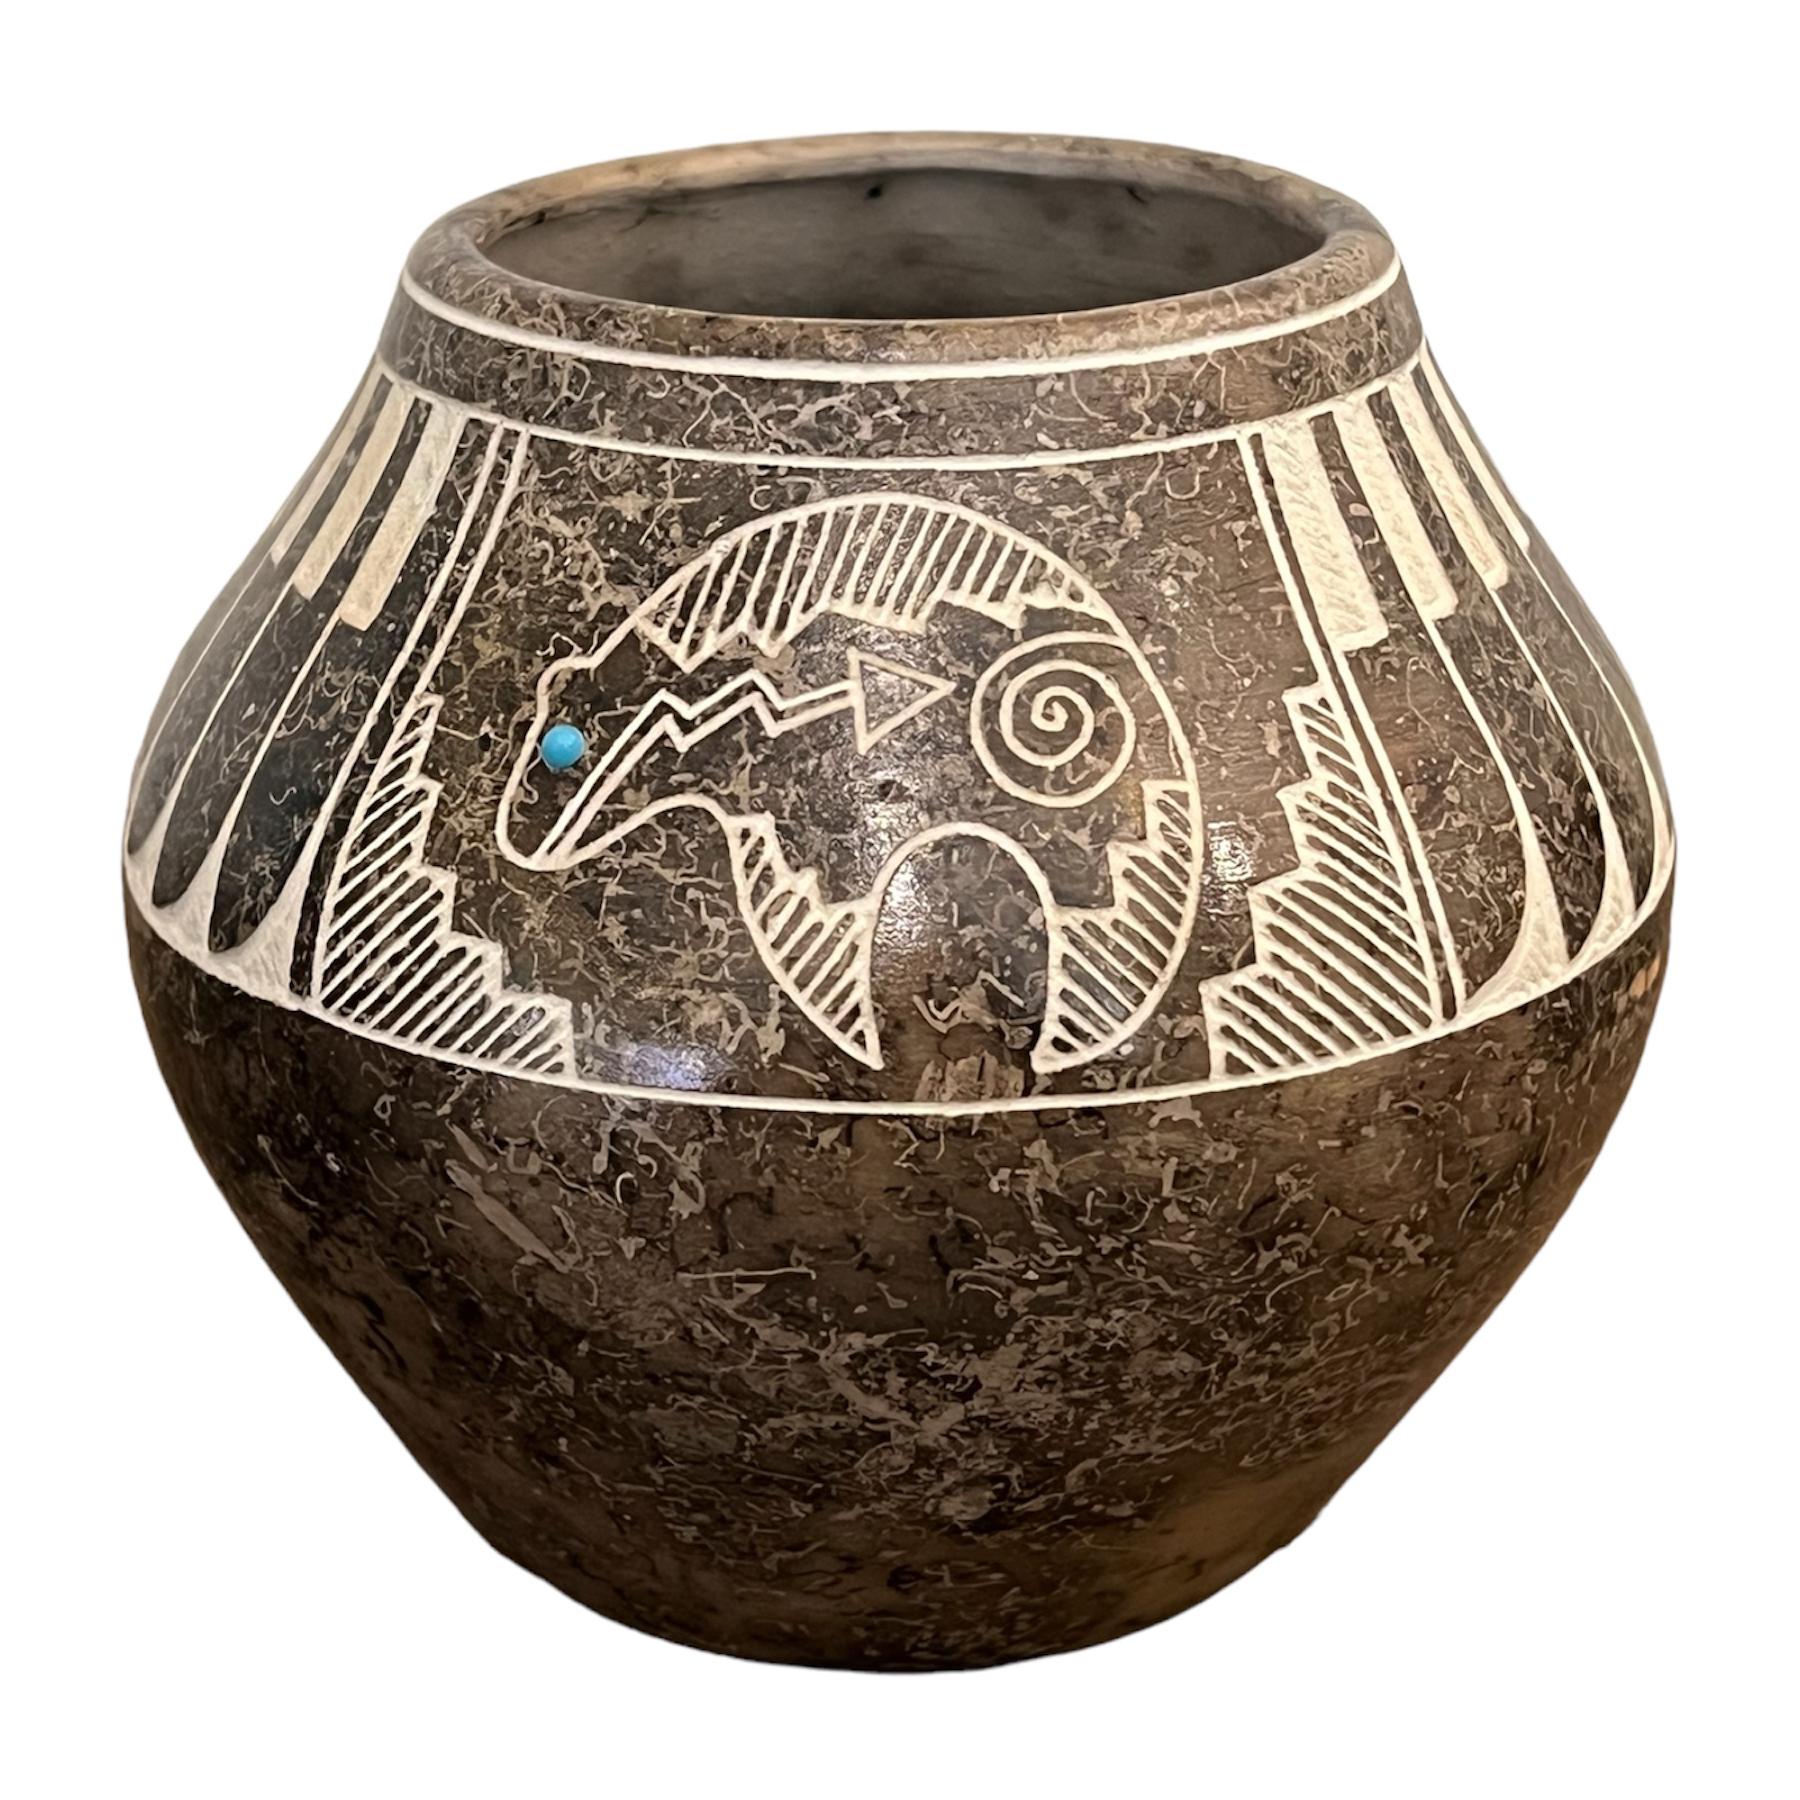 Acoma pot with horsehair detailing - Art by Corrine Louis